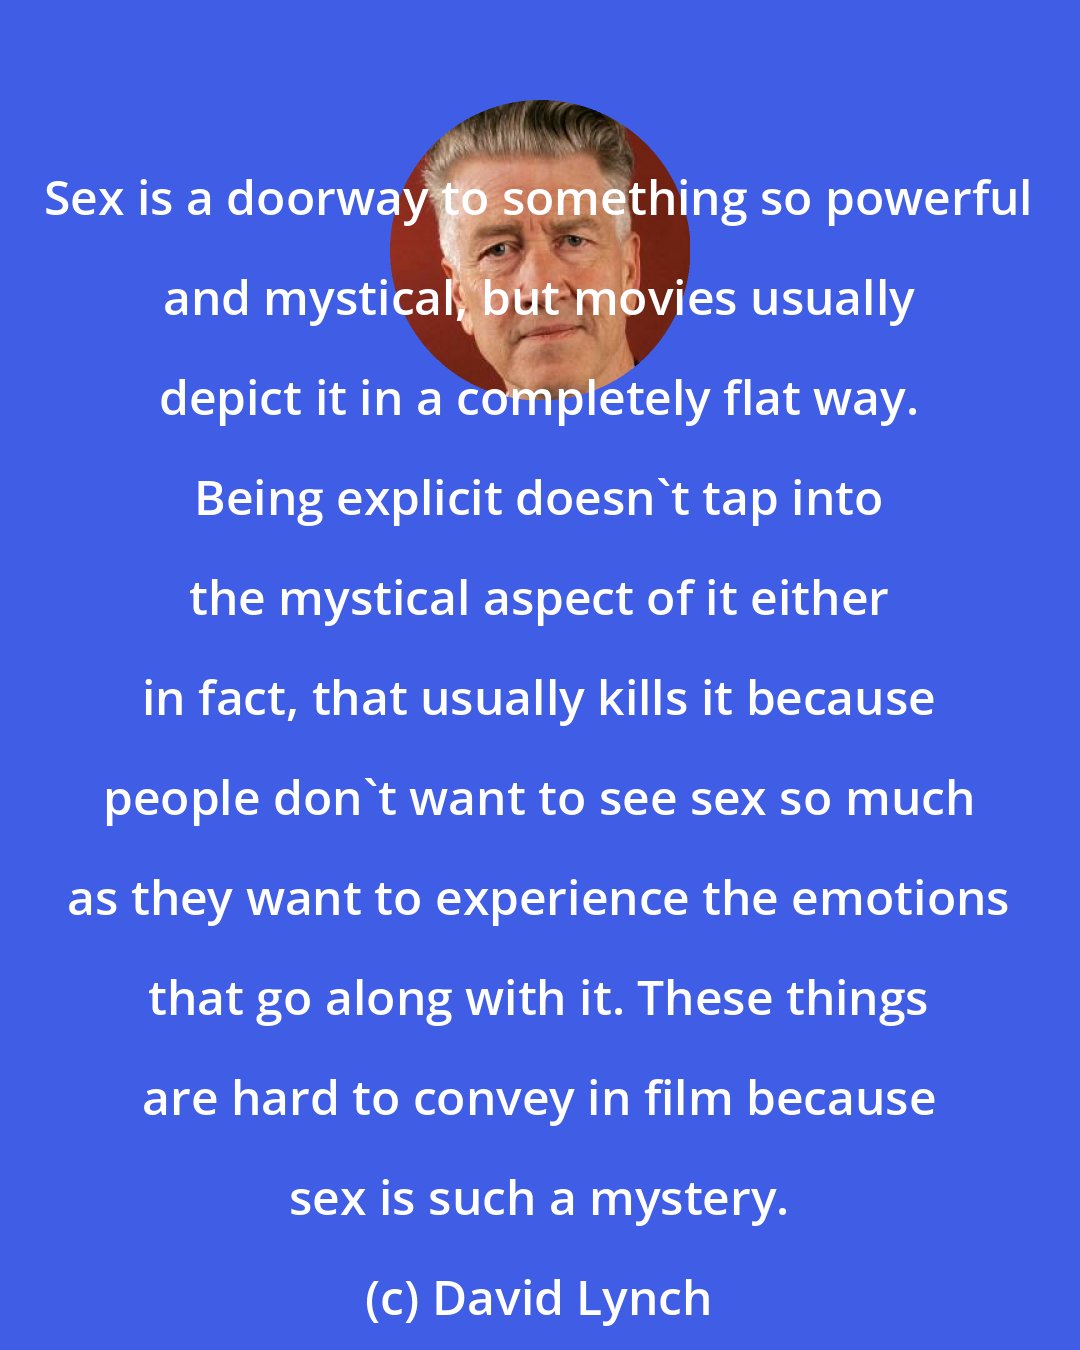 David Lynch: Sex is a doorway to something so powerful and mystical, but movies usually depict it in a completely flat way. Being explicit doesn't tap into the mystical aspect of it either in fact, that usually kills it because people don't want to see sex so much as they want to experience the emotions that go along with it. These things are hard to convey in film because sex is such a mystery.